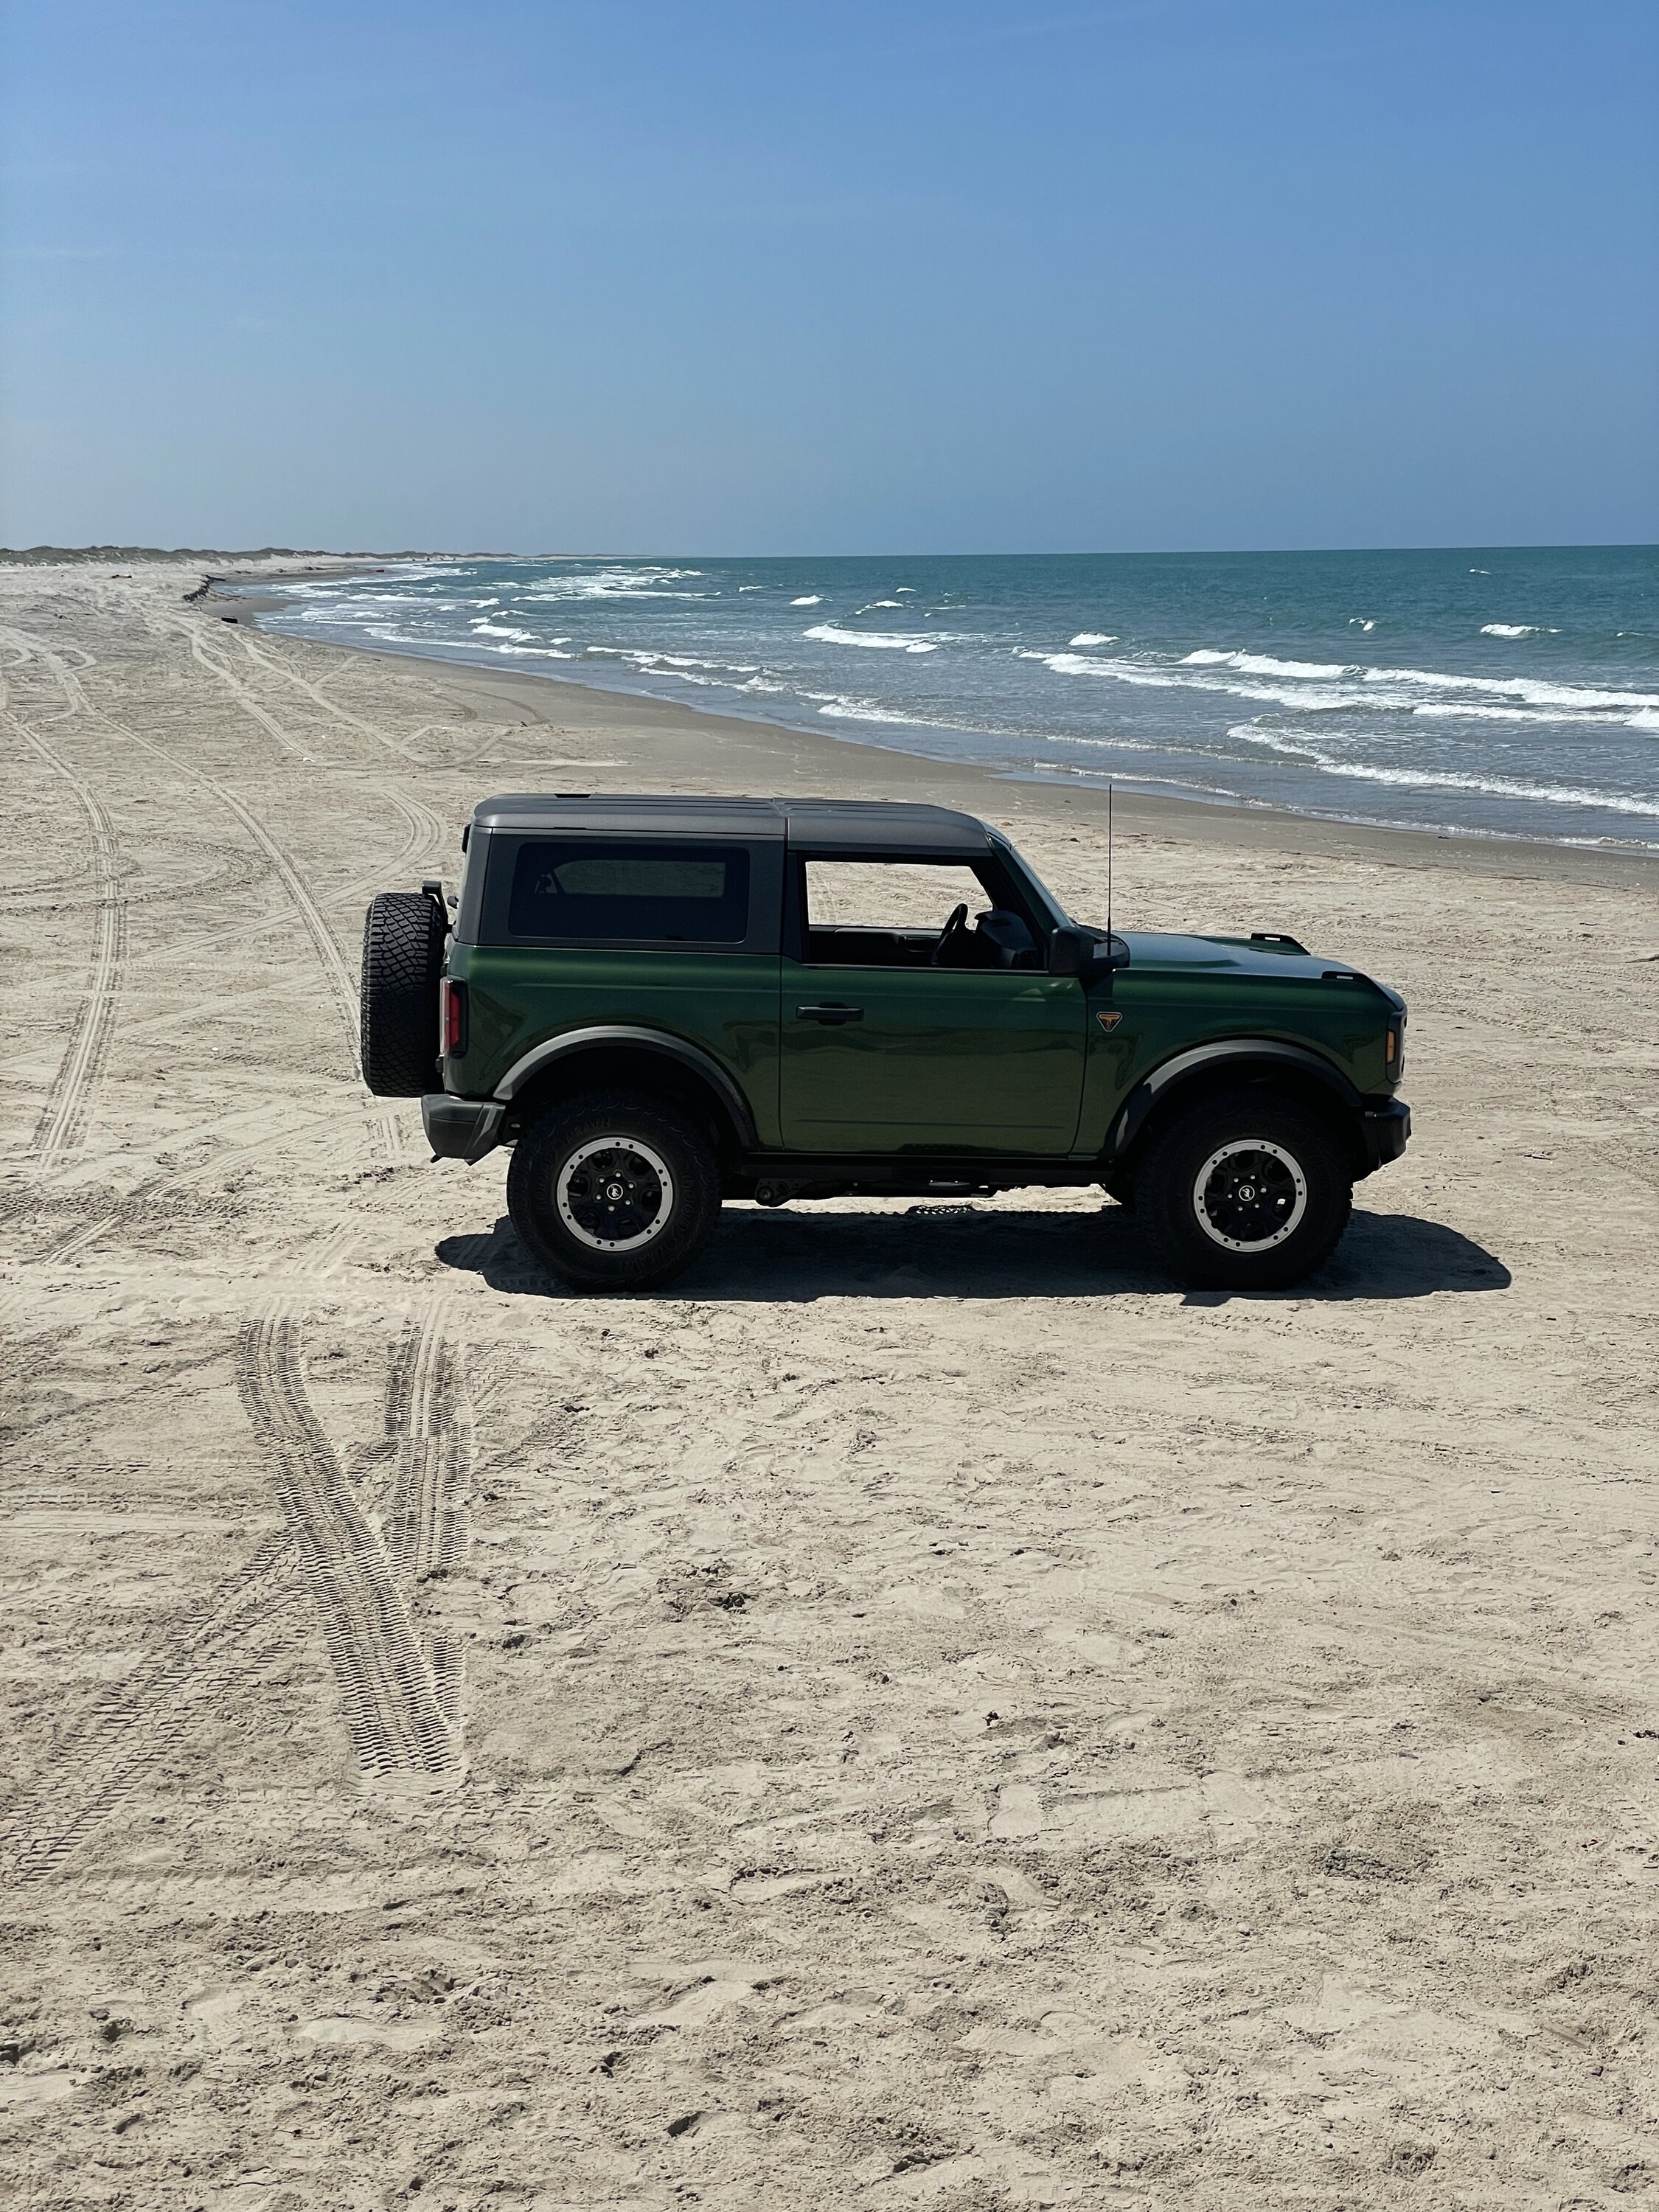 Ford Bronco Beachsquatch! Cruising the sand for the first time IMG_5604